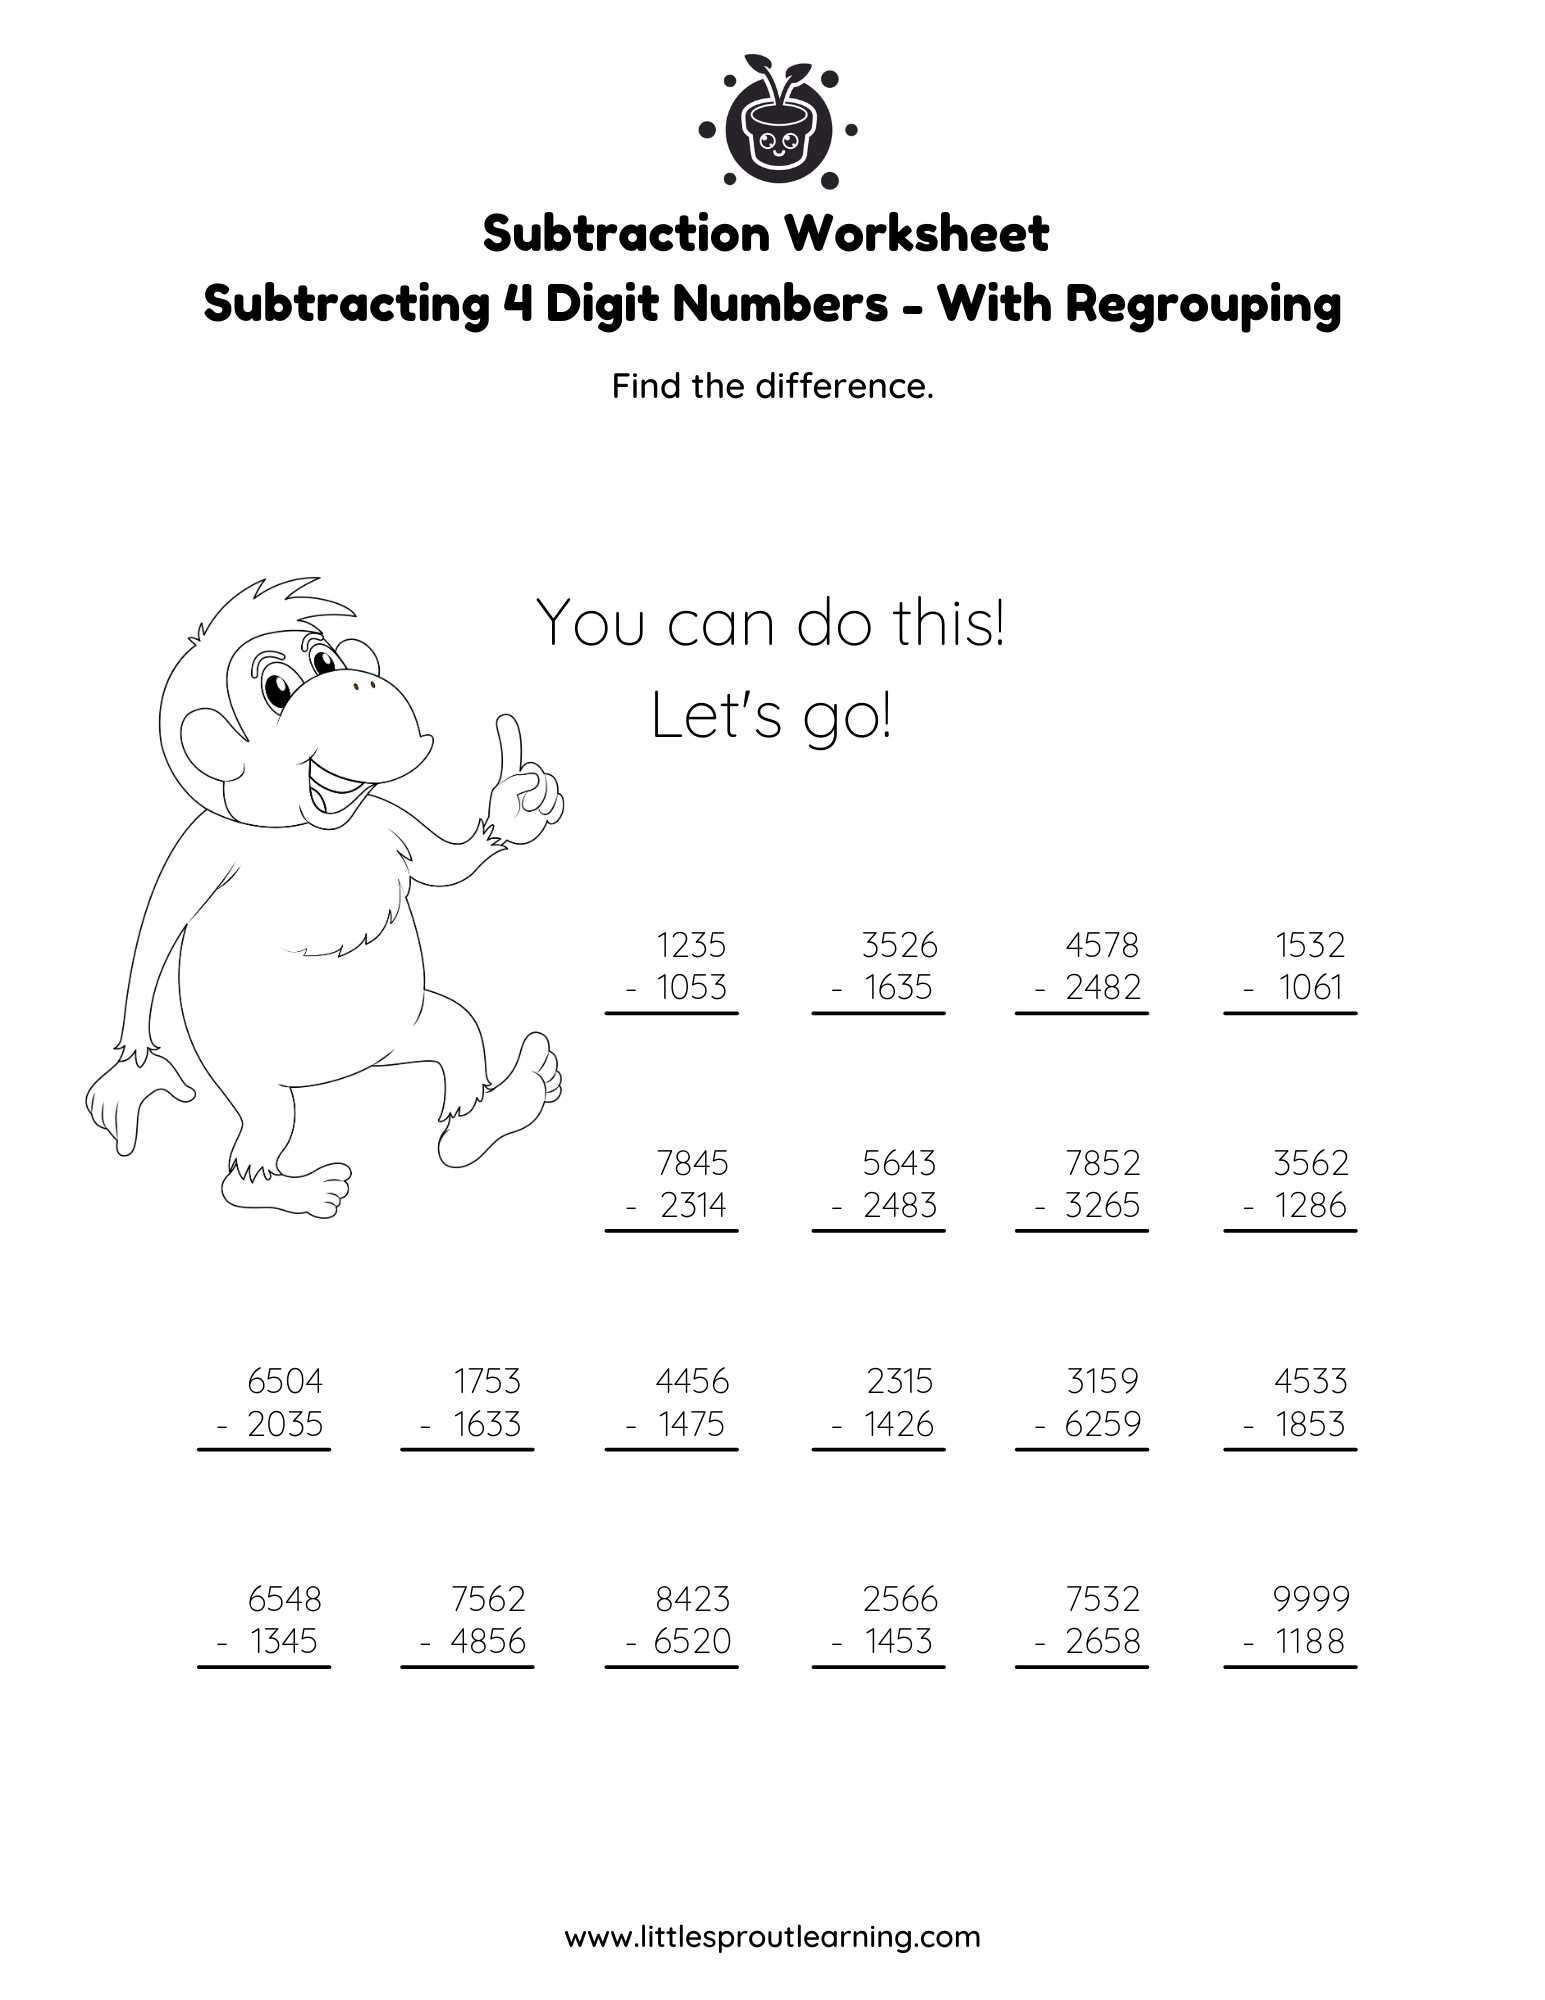 4 Digit Subtraction with Regrouping Math Worksheet